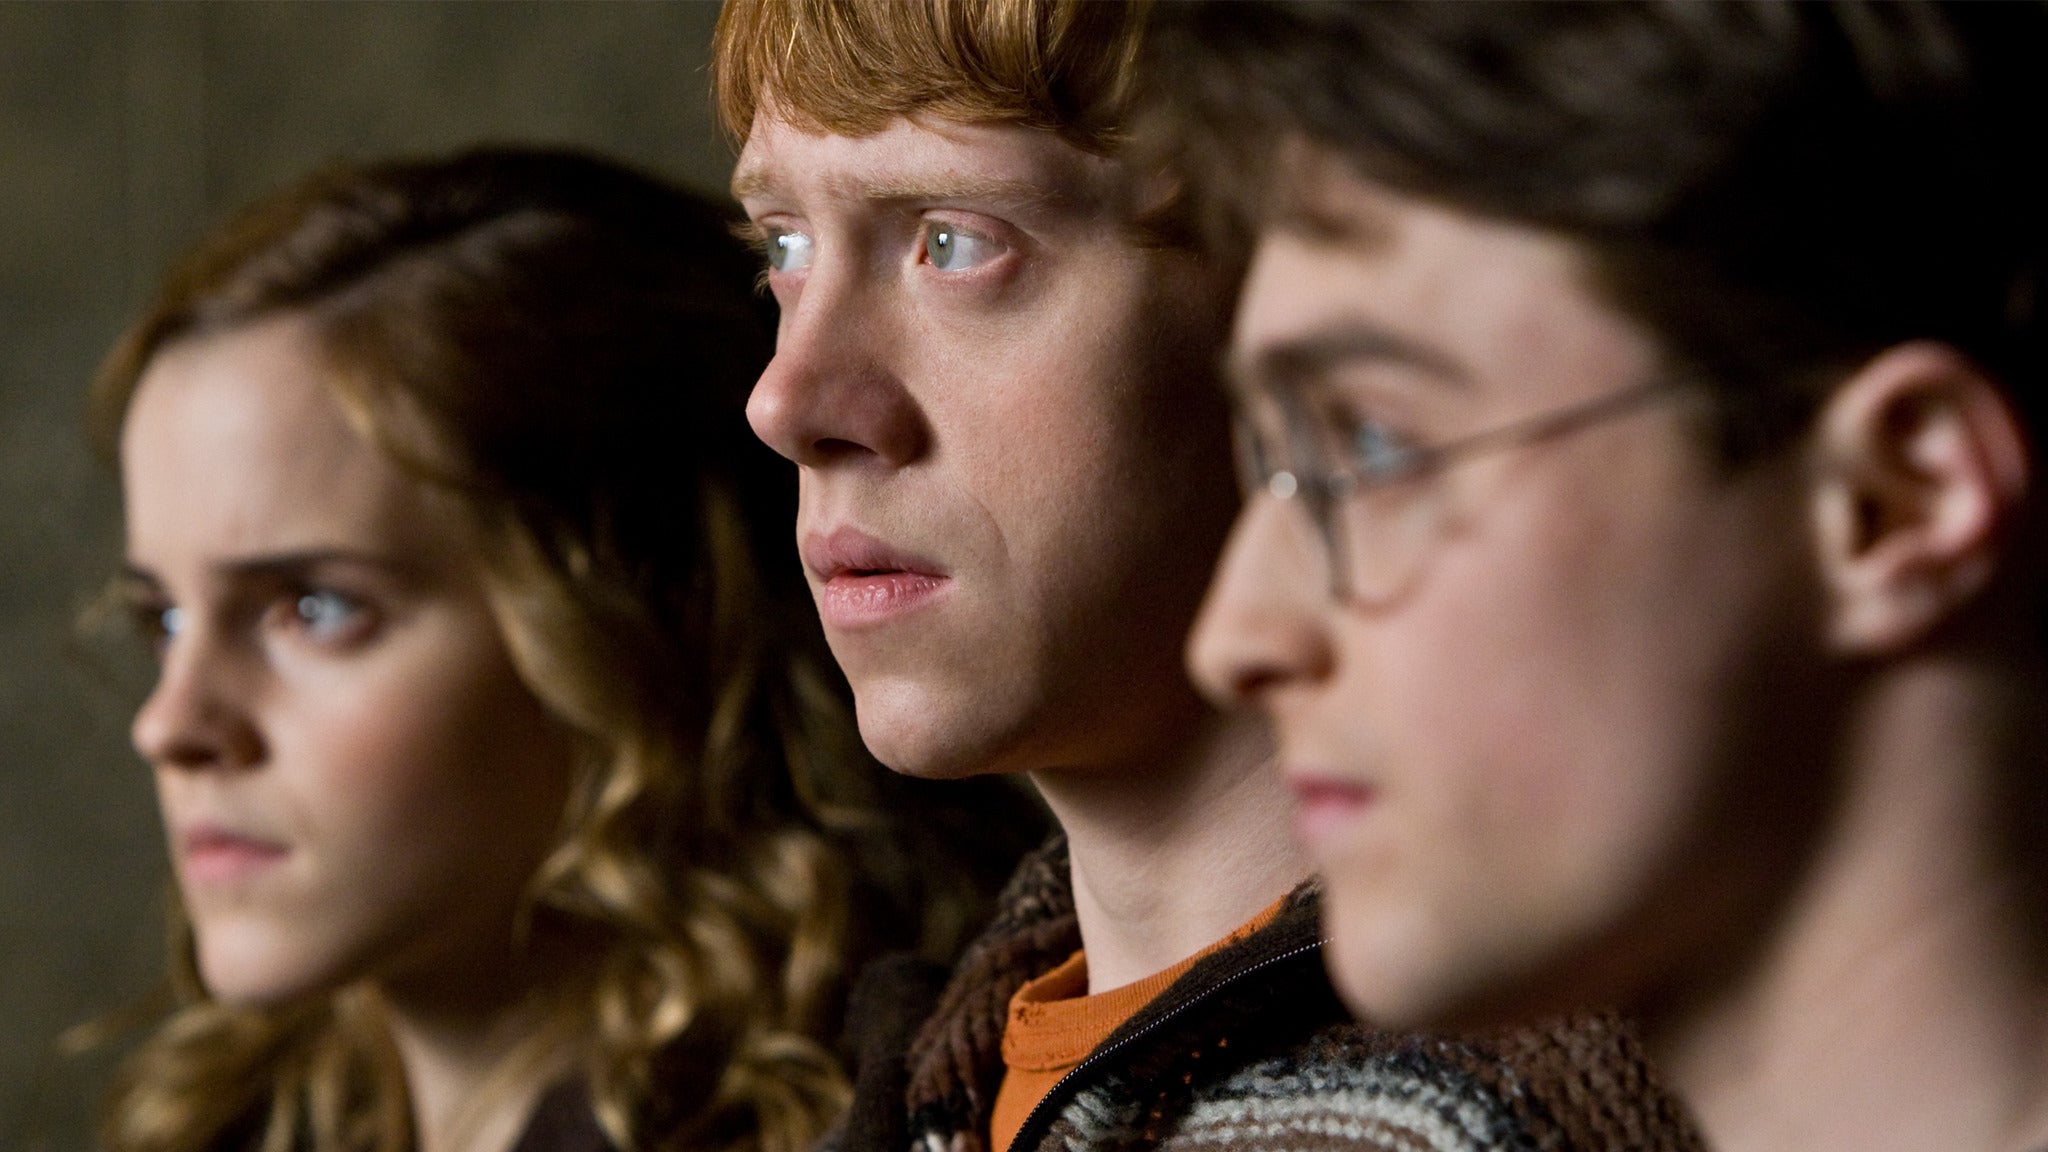 Harry Potter And The Half-blood Prince: Live In Concert presale password for advance tickets in Atlanta